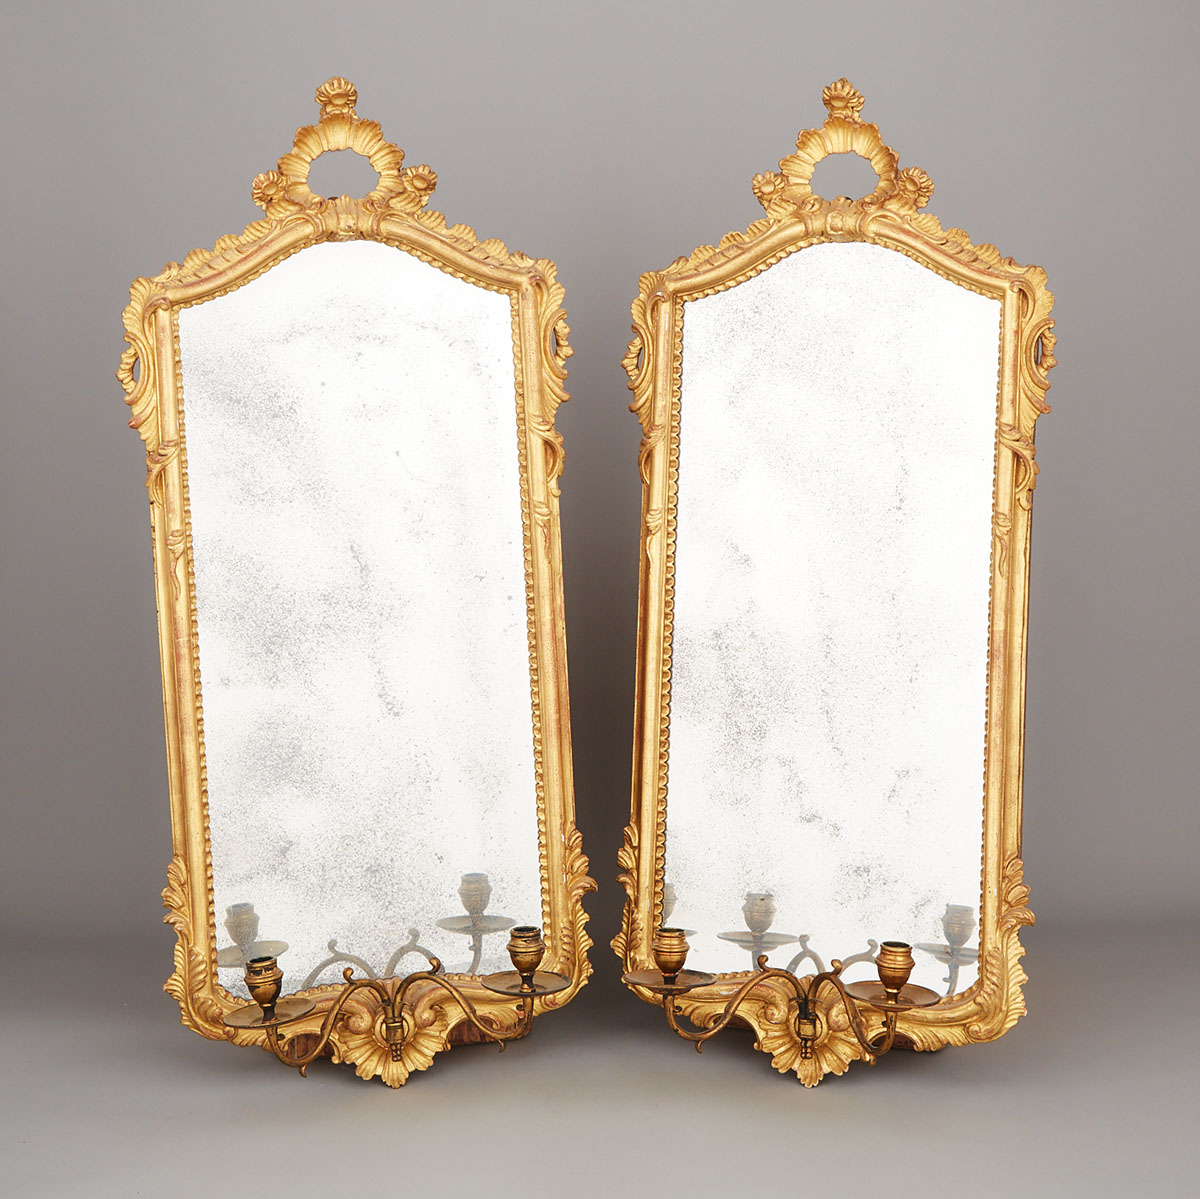 Pair of Italian Mirrored Giltwood Wall Sconces, mid 20th century